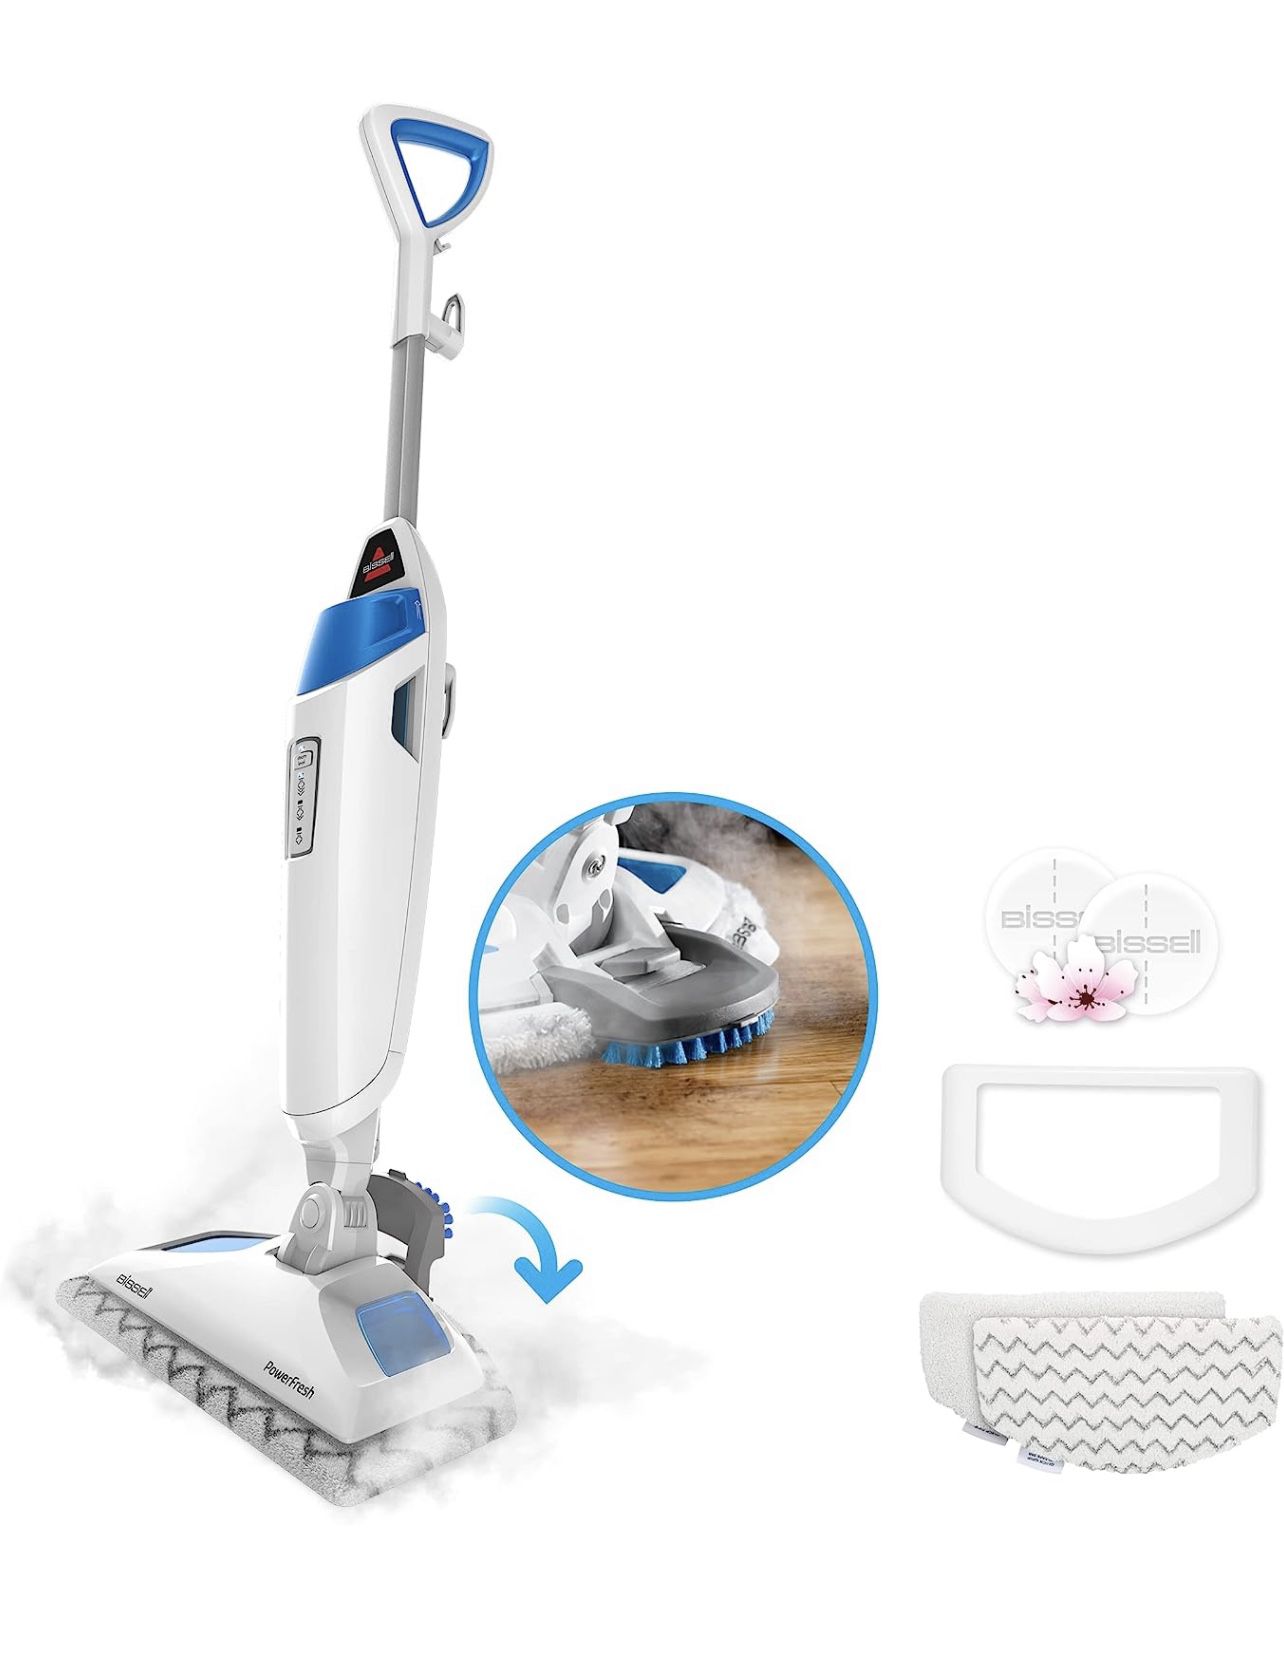 Bissell Power Fresh Steam Mop with Natural Sanitization, Floor Steamer, Tile Cleaner, and Hard Wood Floor Cleaner with Flip-Down Easy Scrubber